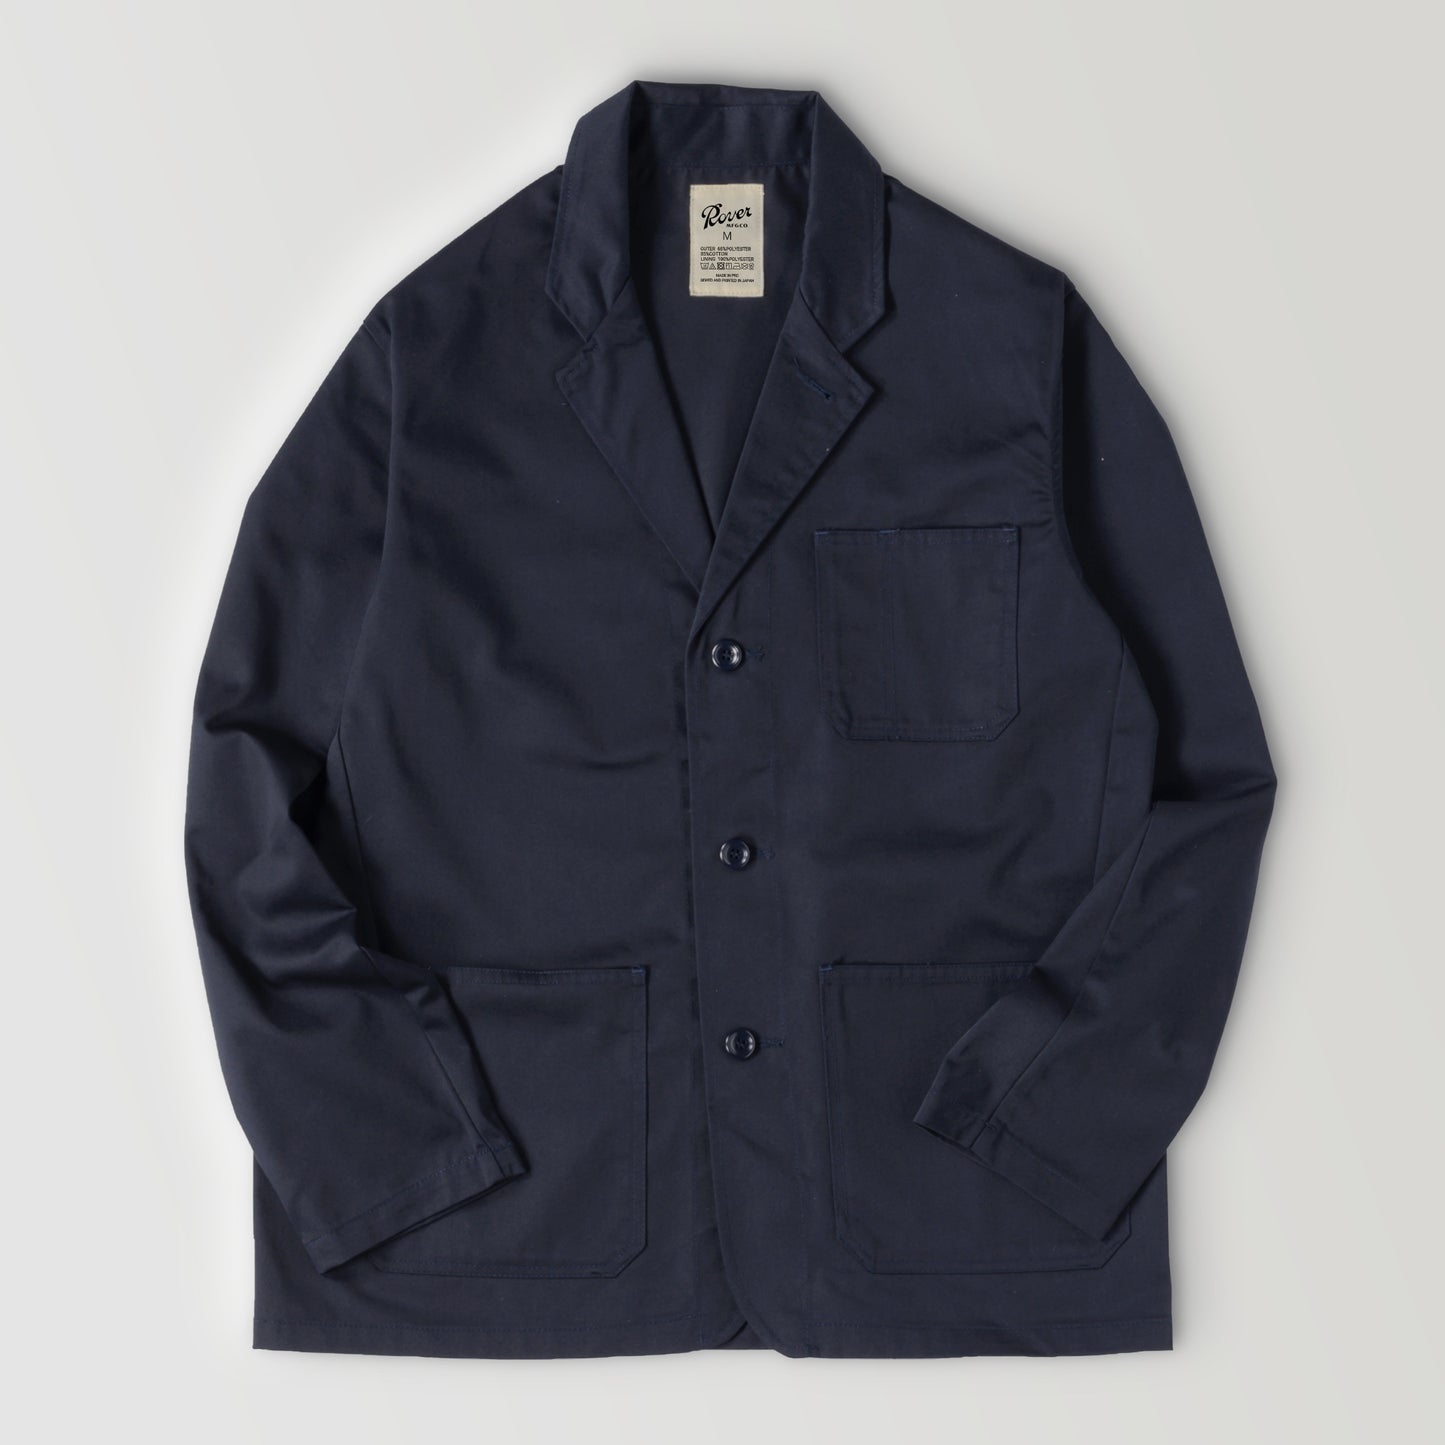 Classic Col. / Driver's jacket